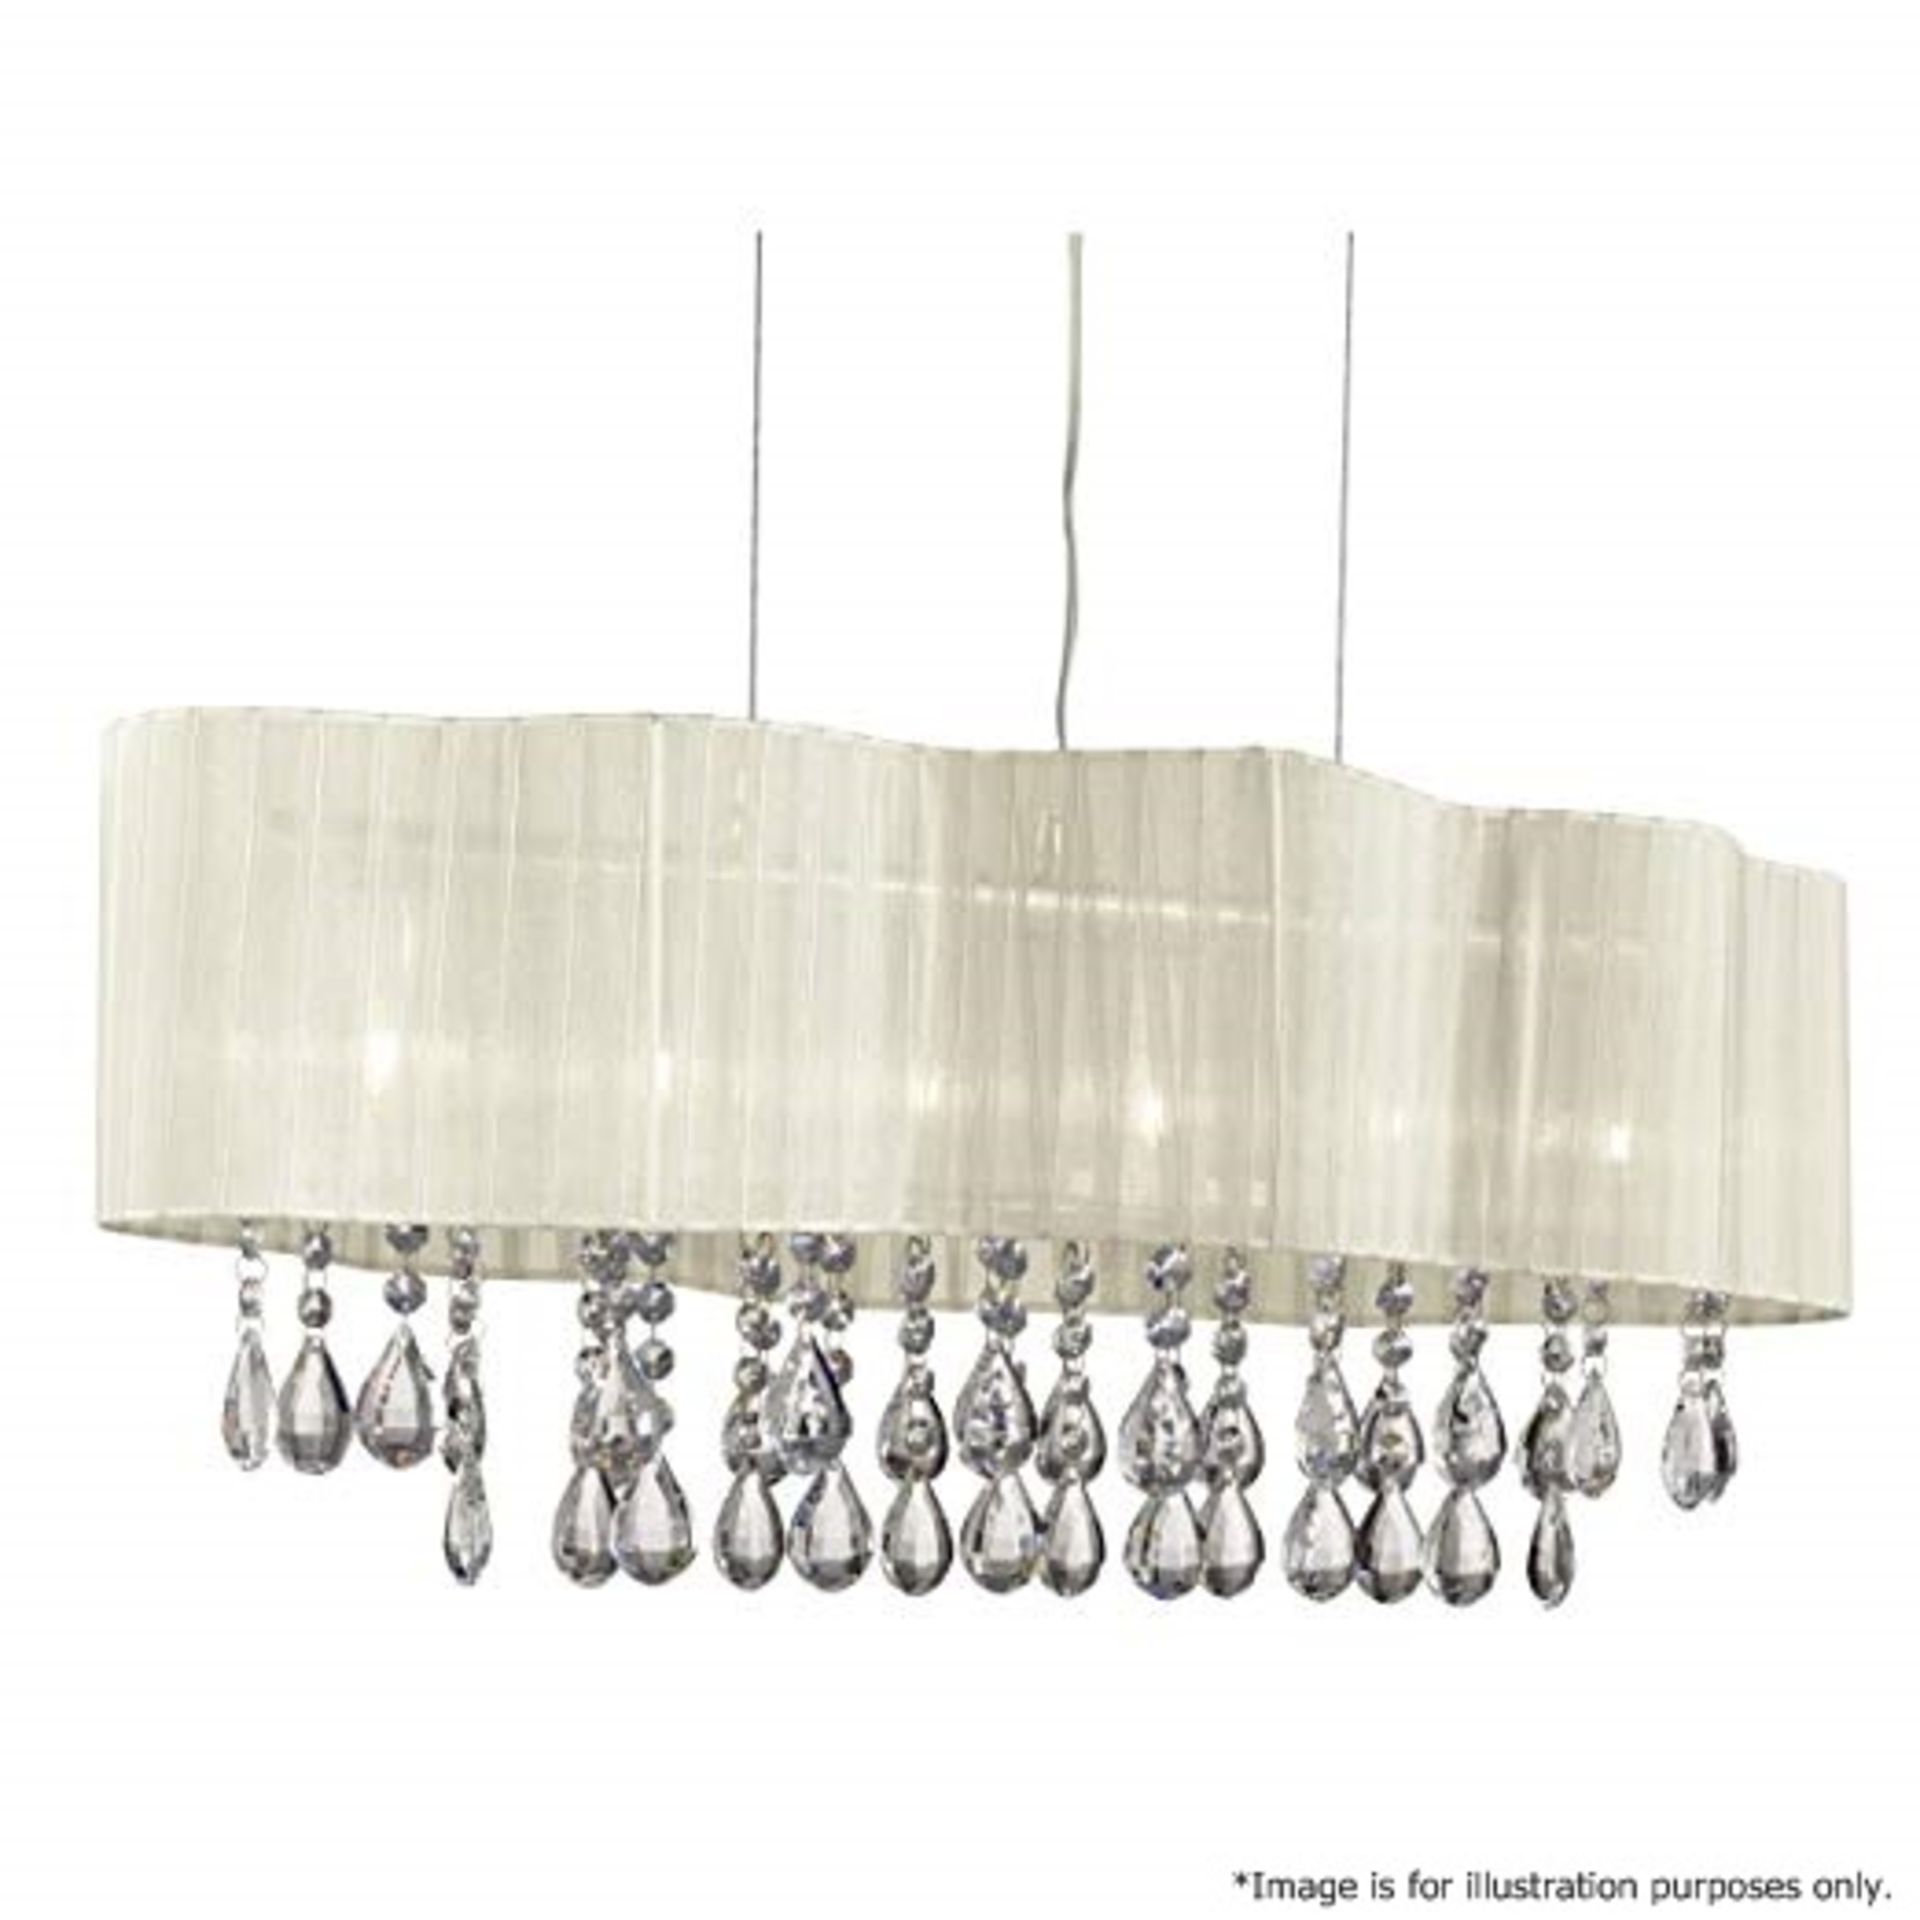 1 x Large Pleated 6-Light Ceiling Light With A Cream Voile Shade - RRP £220.00